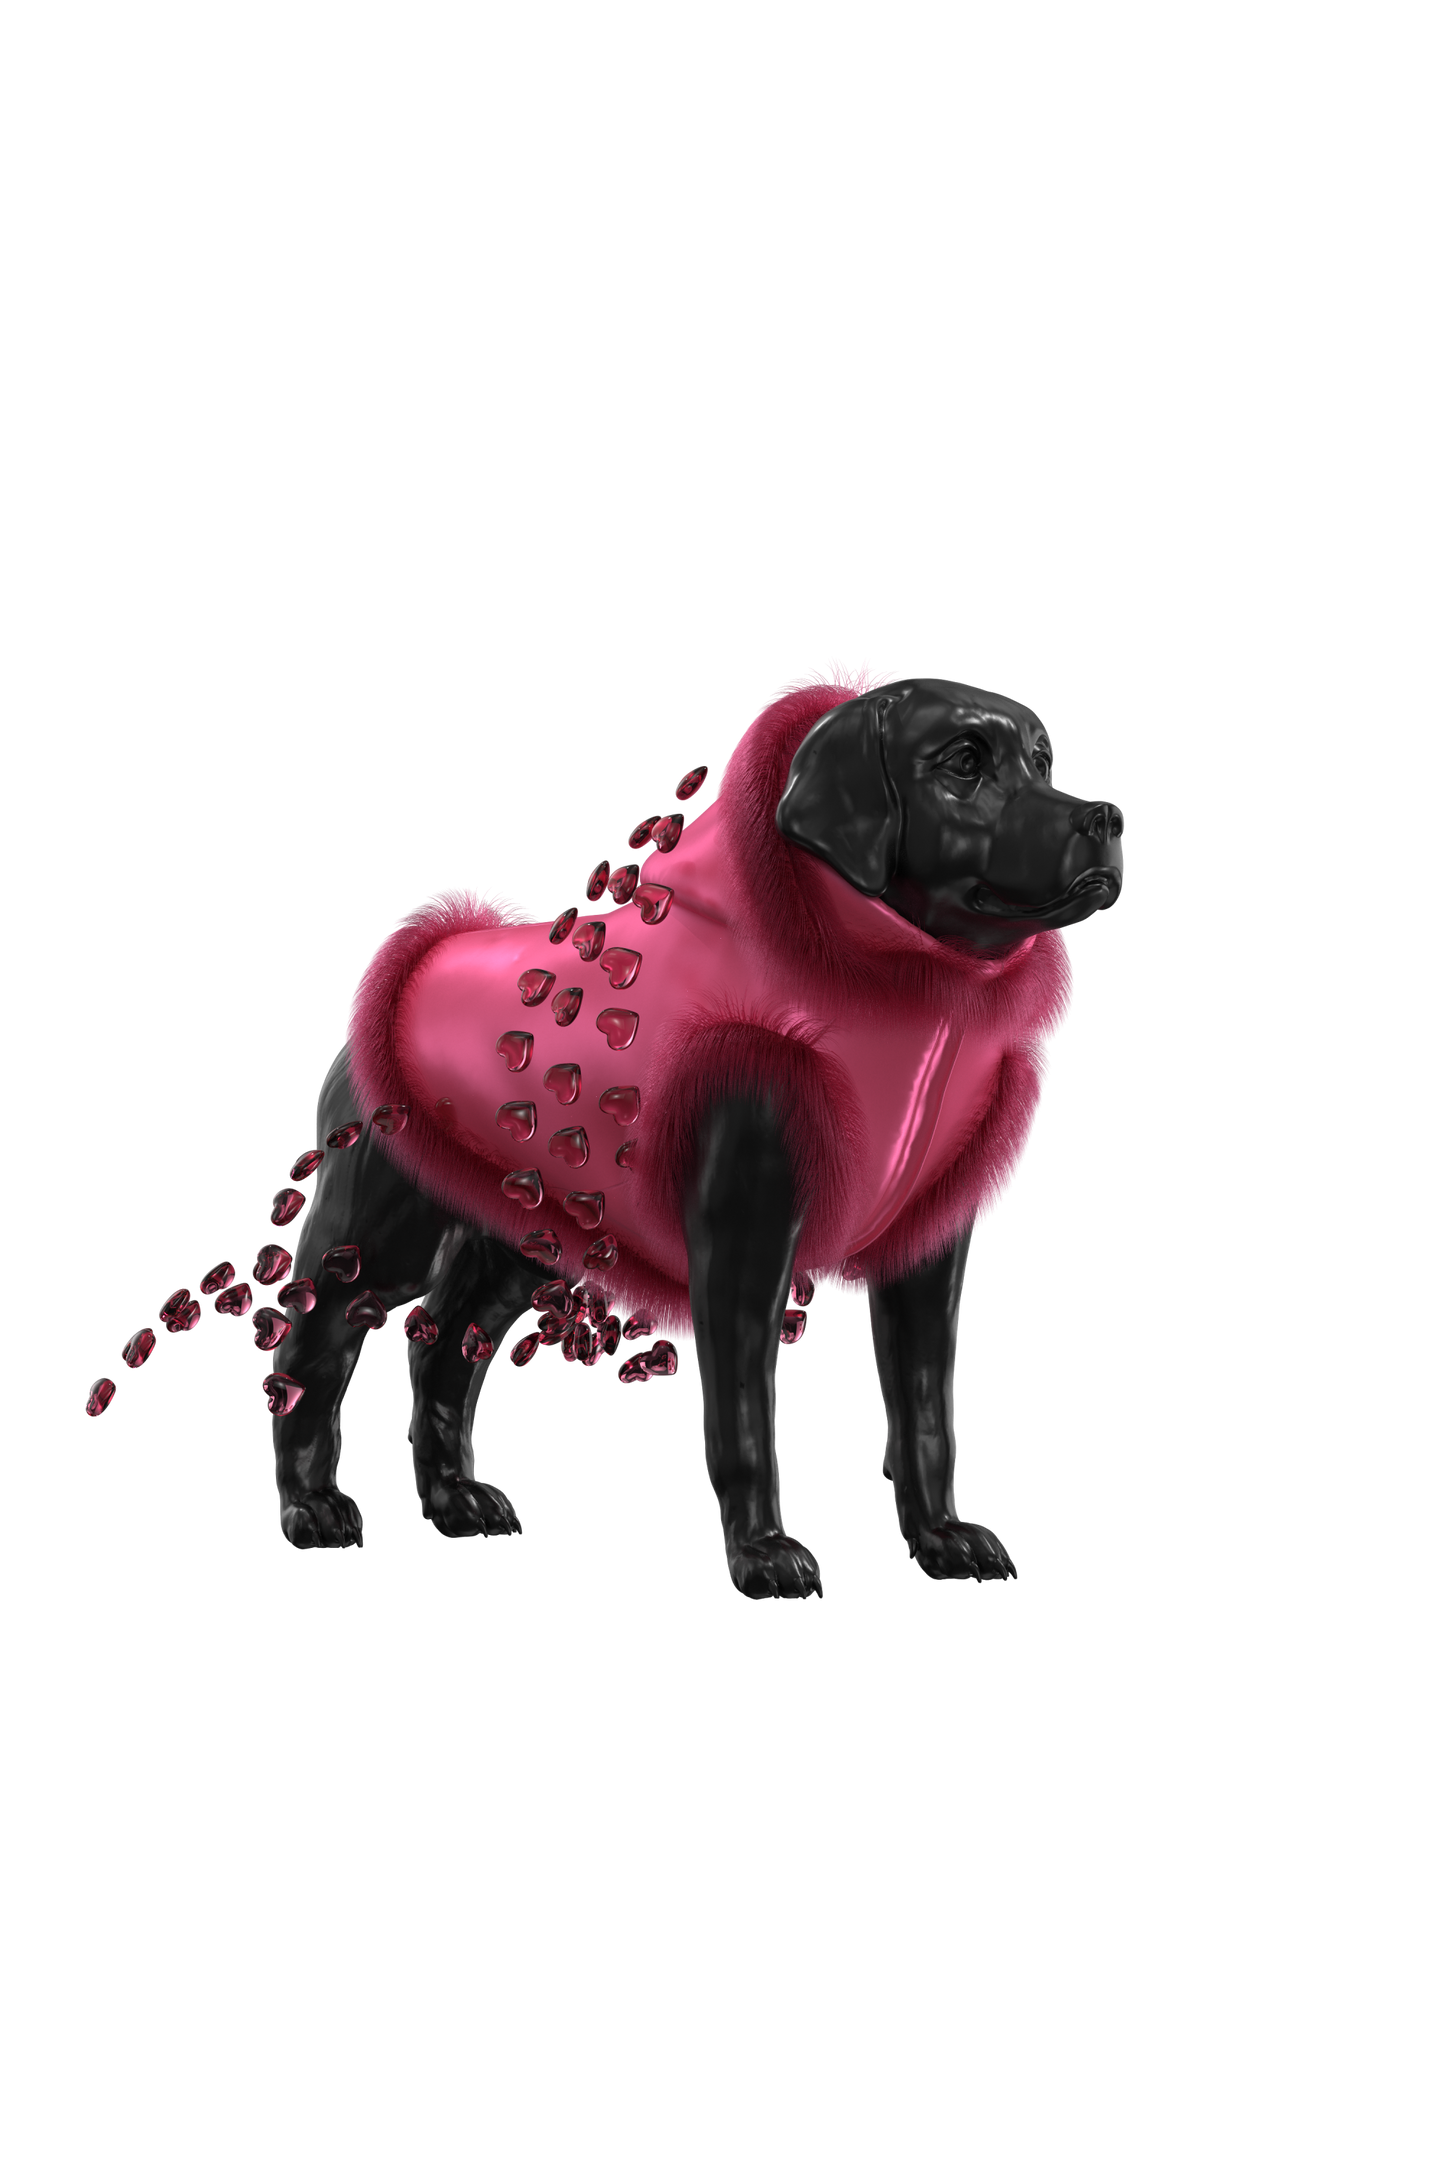  | Heart outfit for cats or dogs